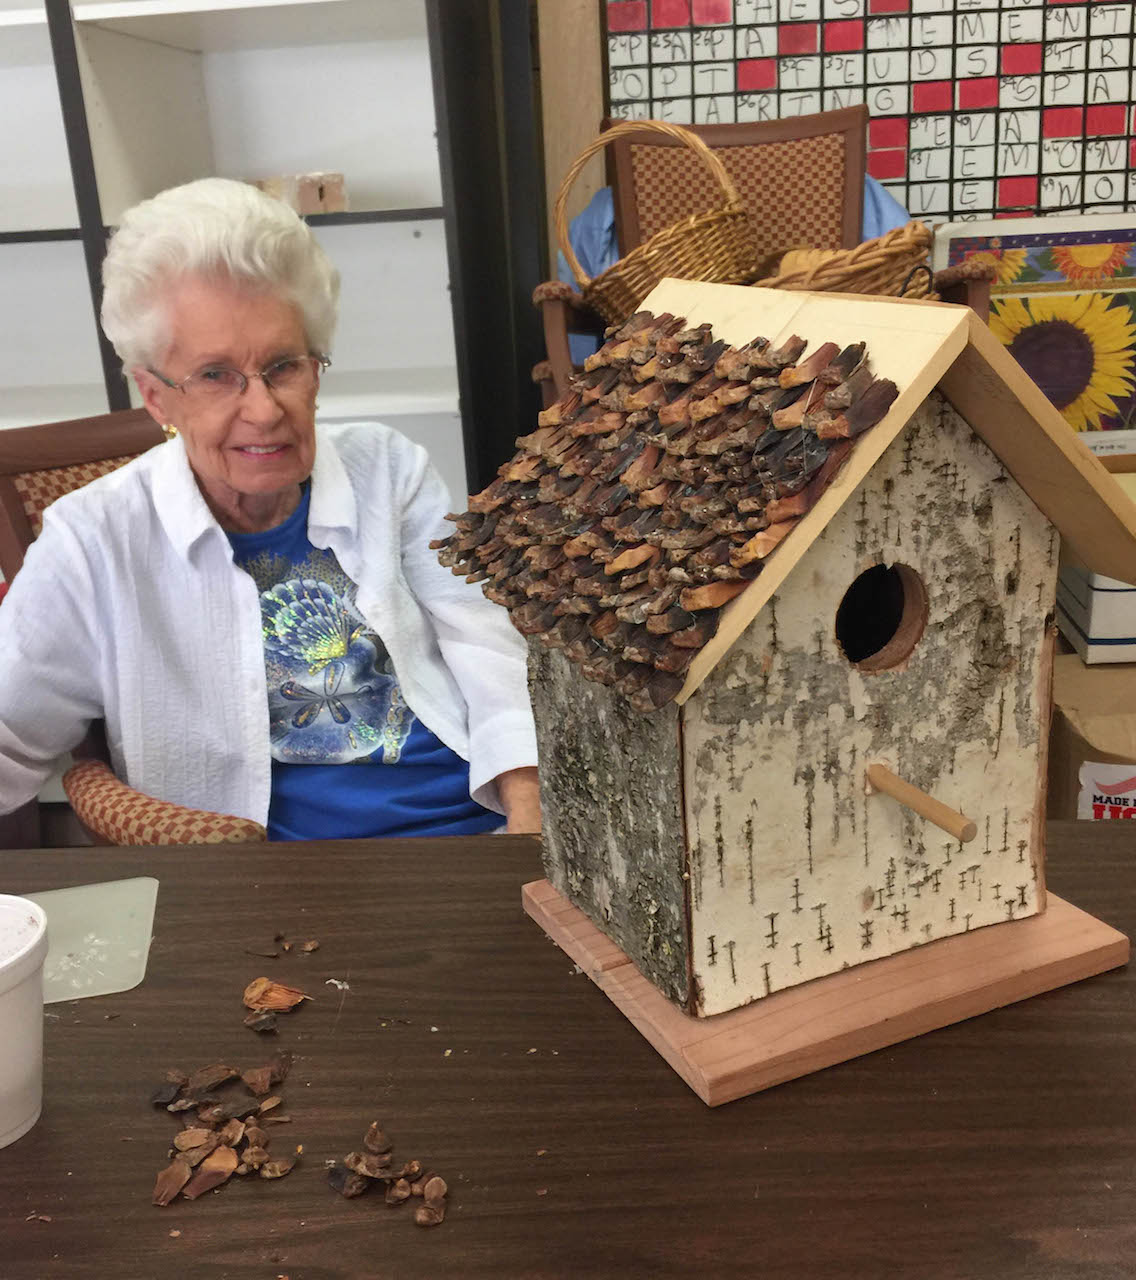 Small Woodworking Projects at Local Senior Center - The ...